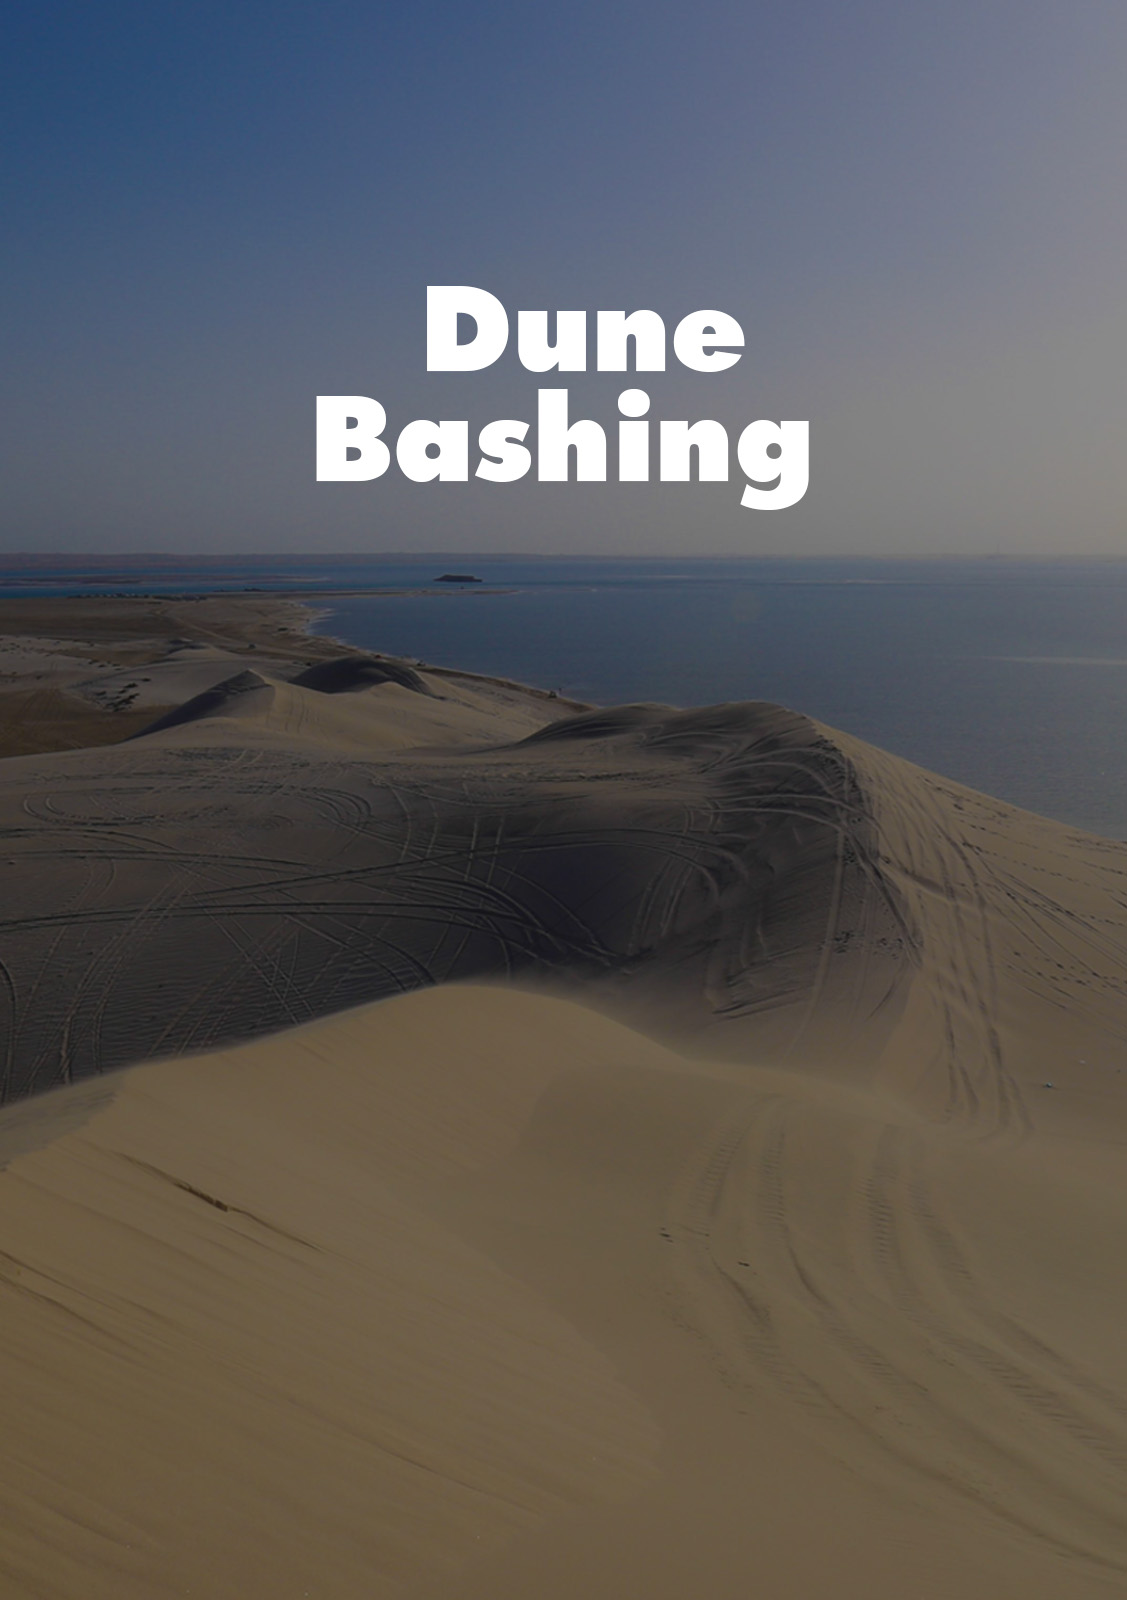 Dune Bashing Come with us and experience the exhilaration of driving over the sand dunes.